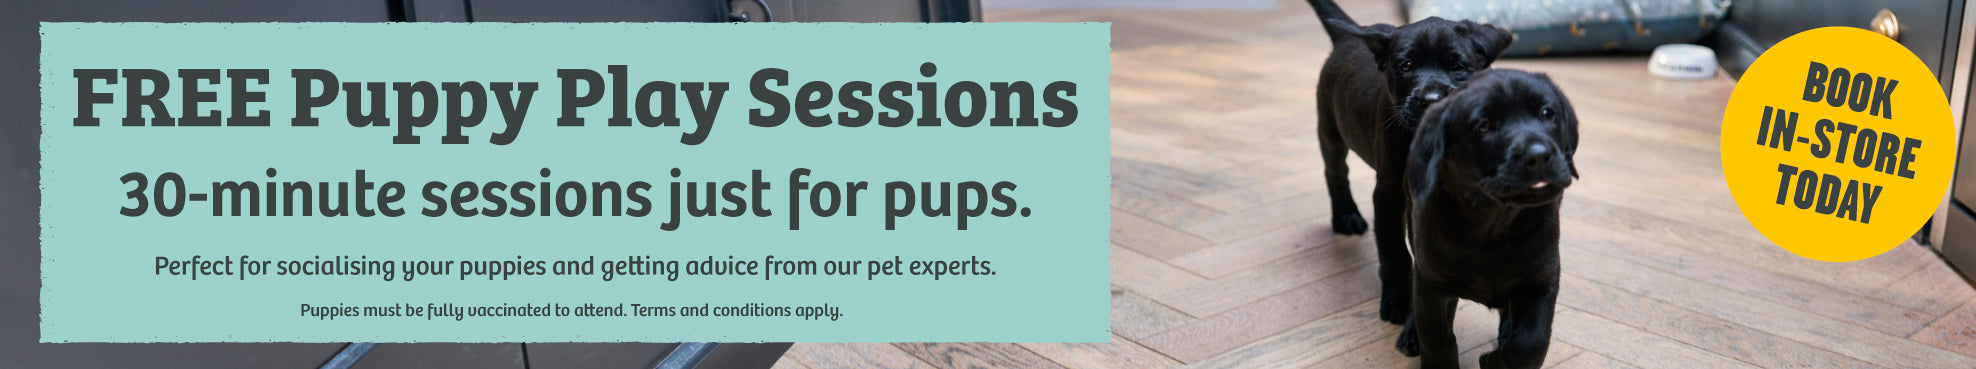 free puppy sessions